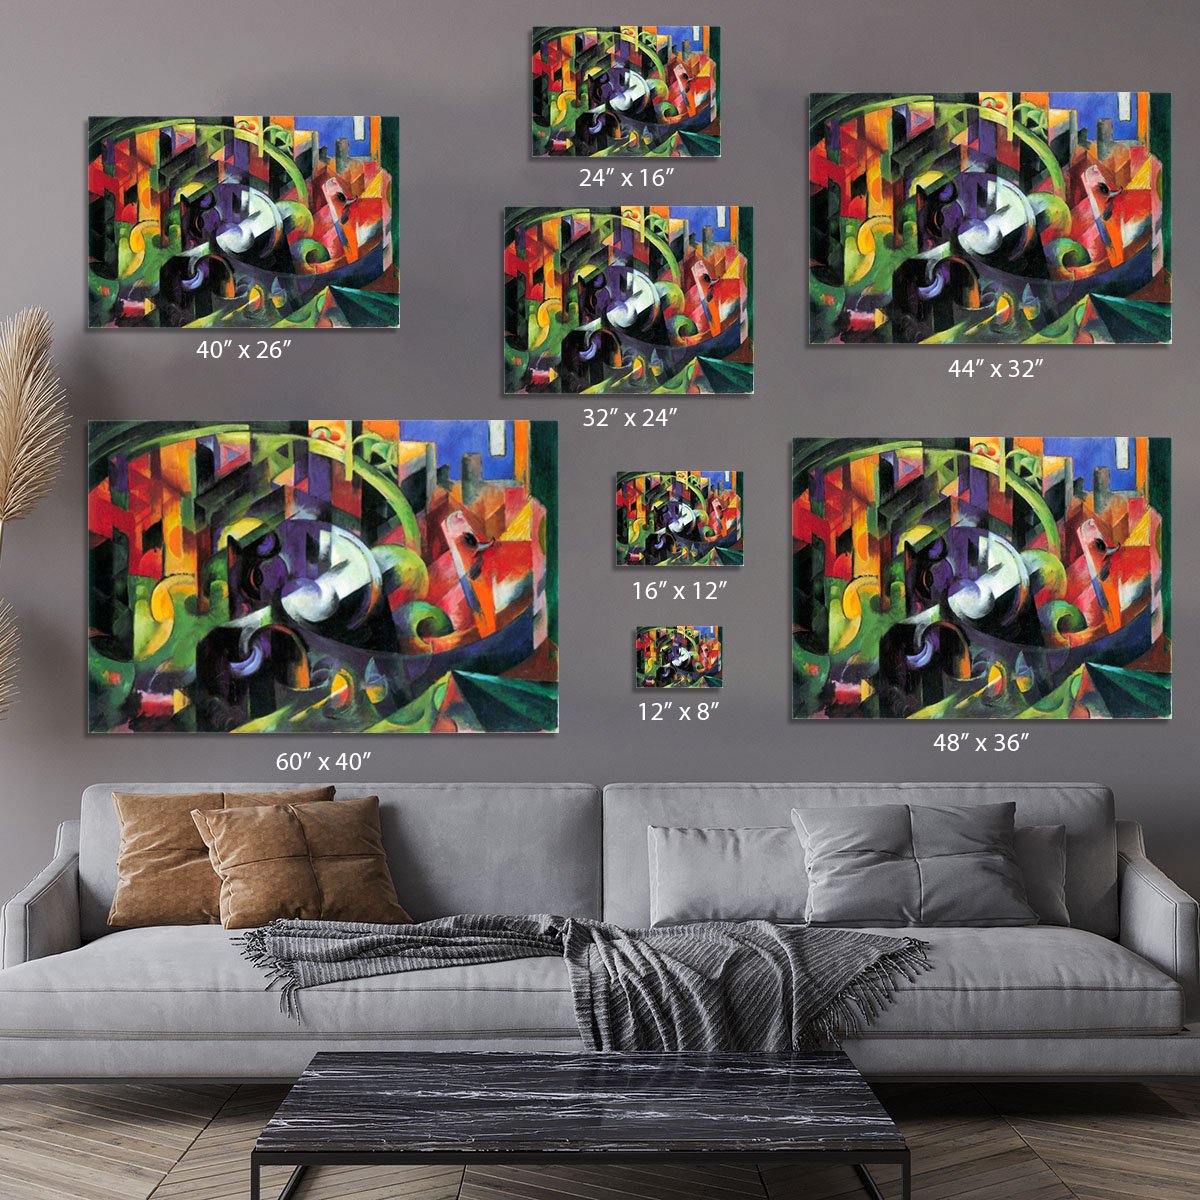 Abstract with cattle by Franz Marc Canvas Print or Poster